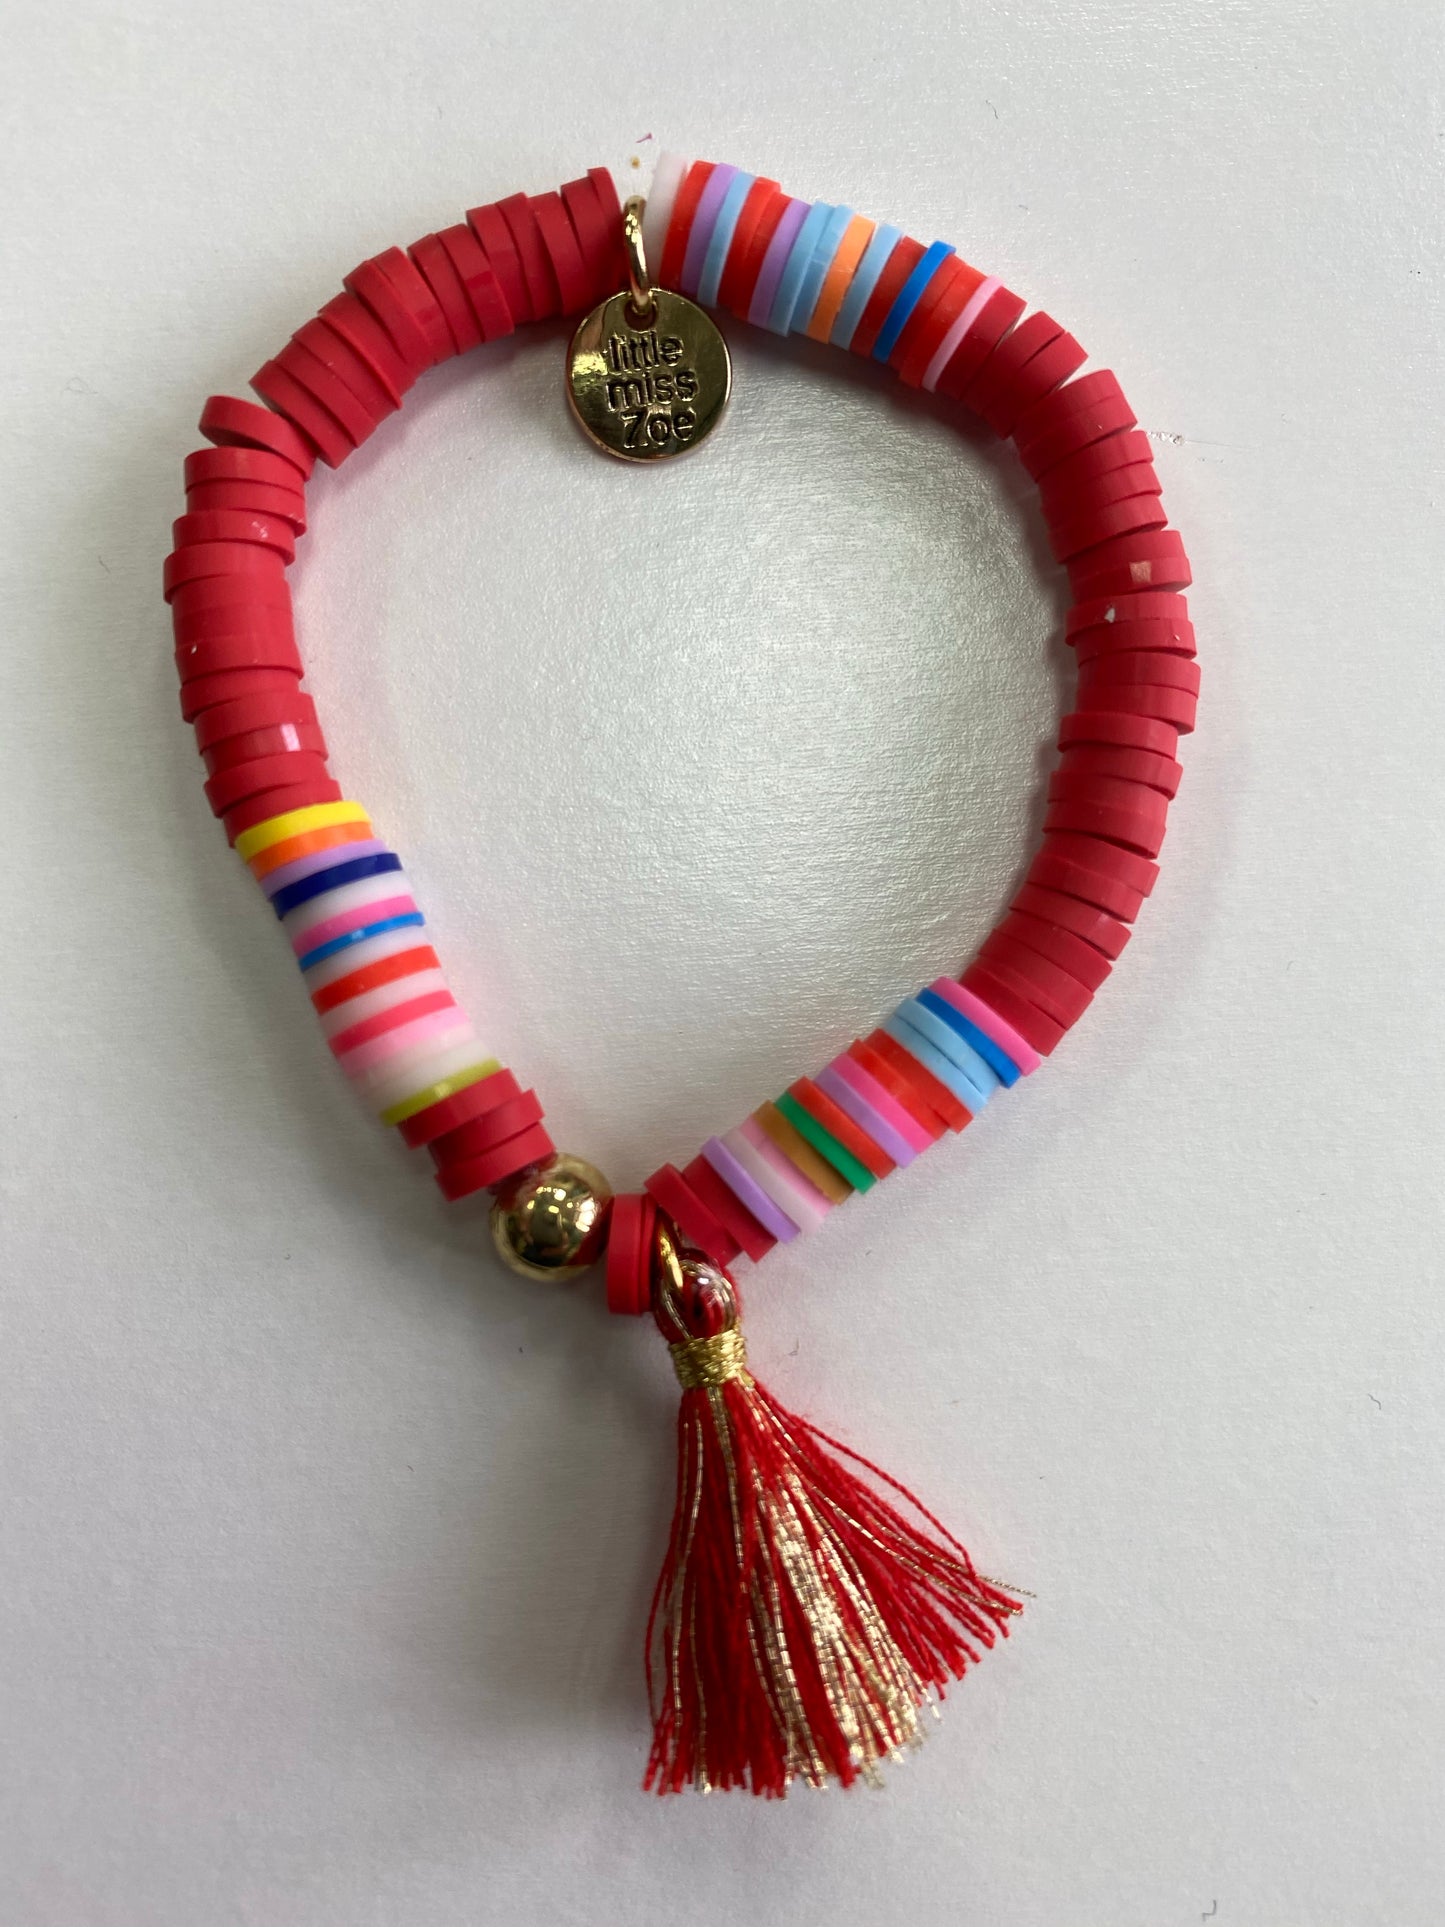 Bracelet with Tassel Red with Red and Gold Tassel - Doodlebug's Children's Boutique